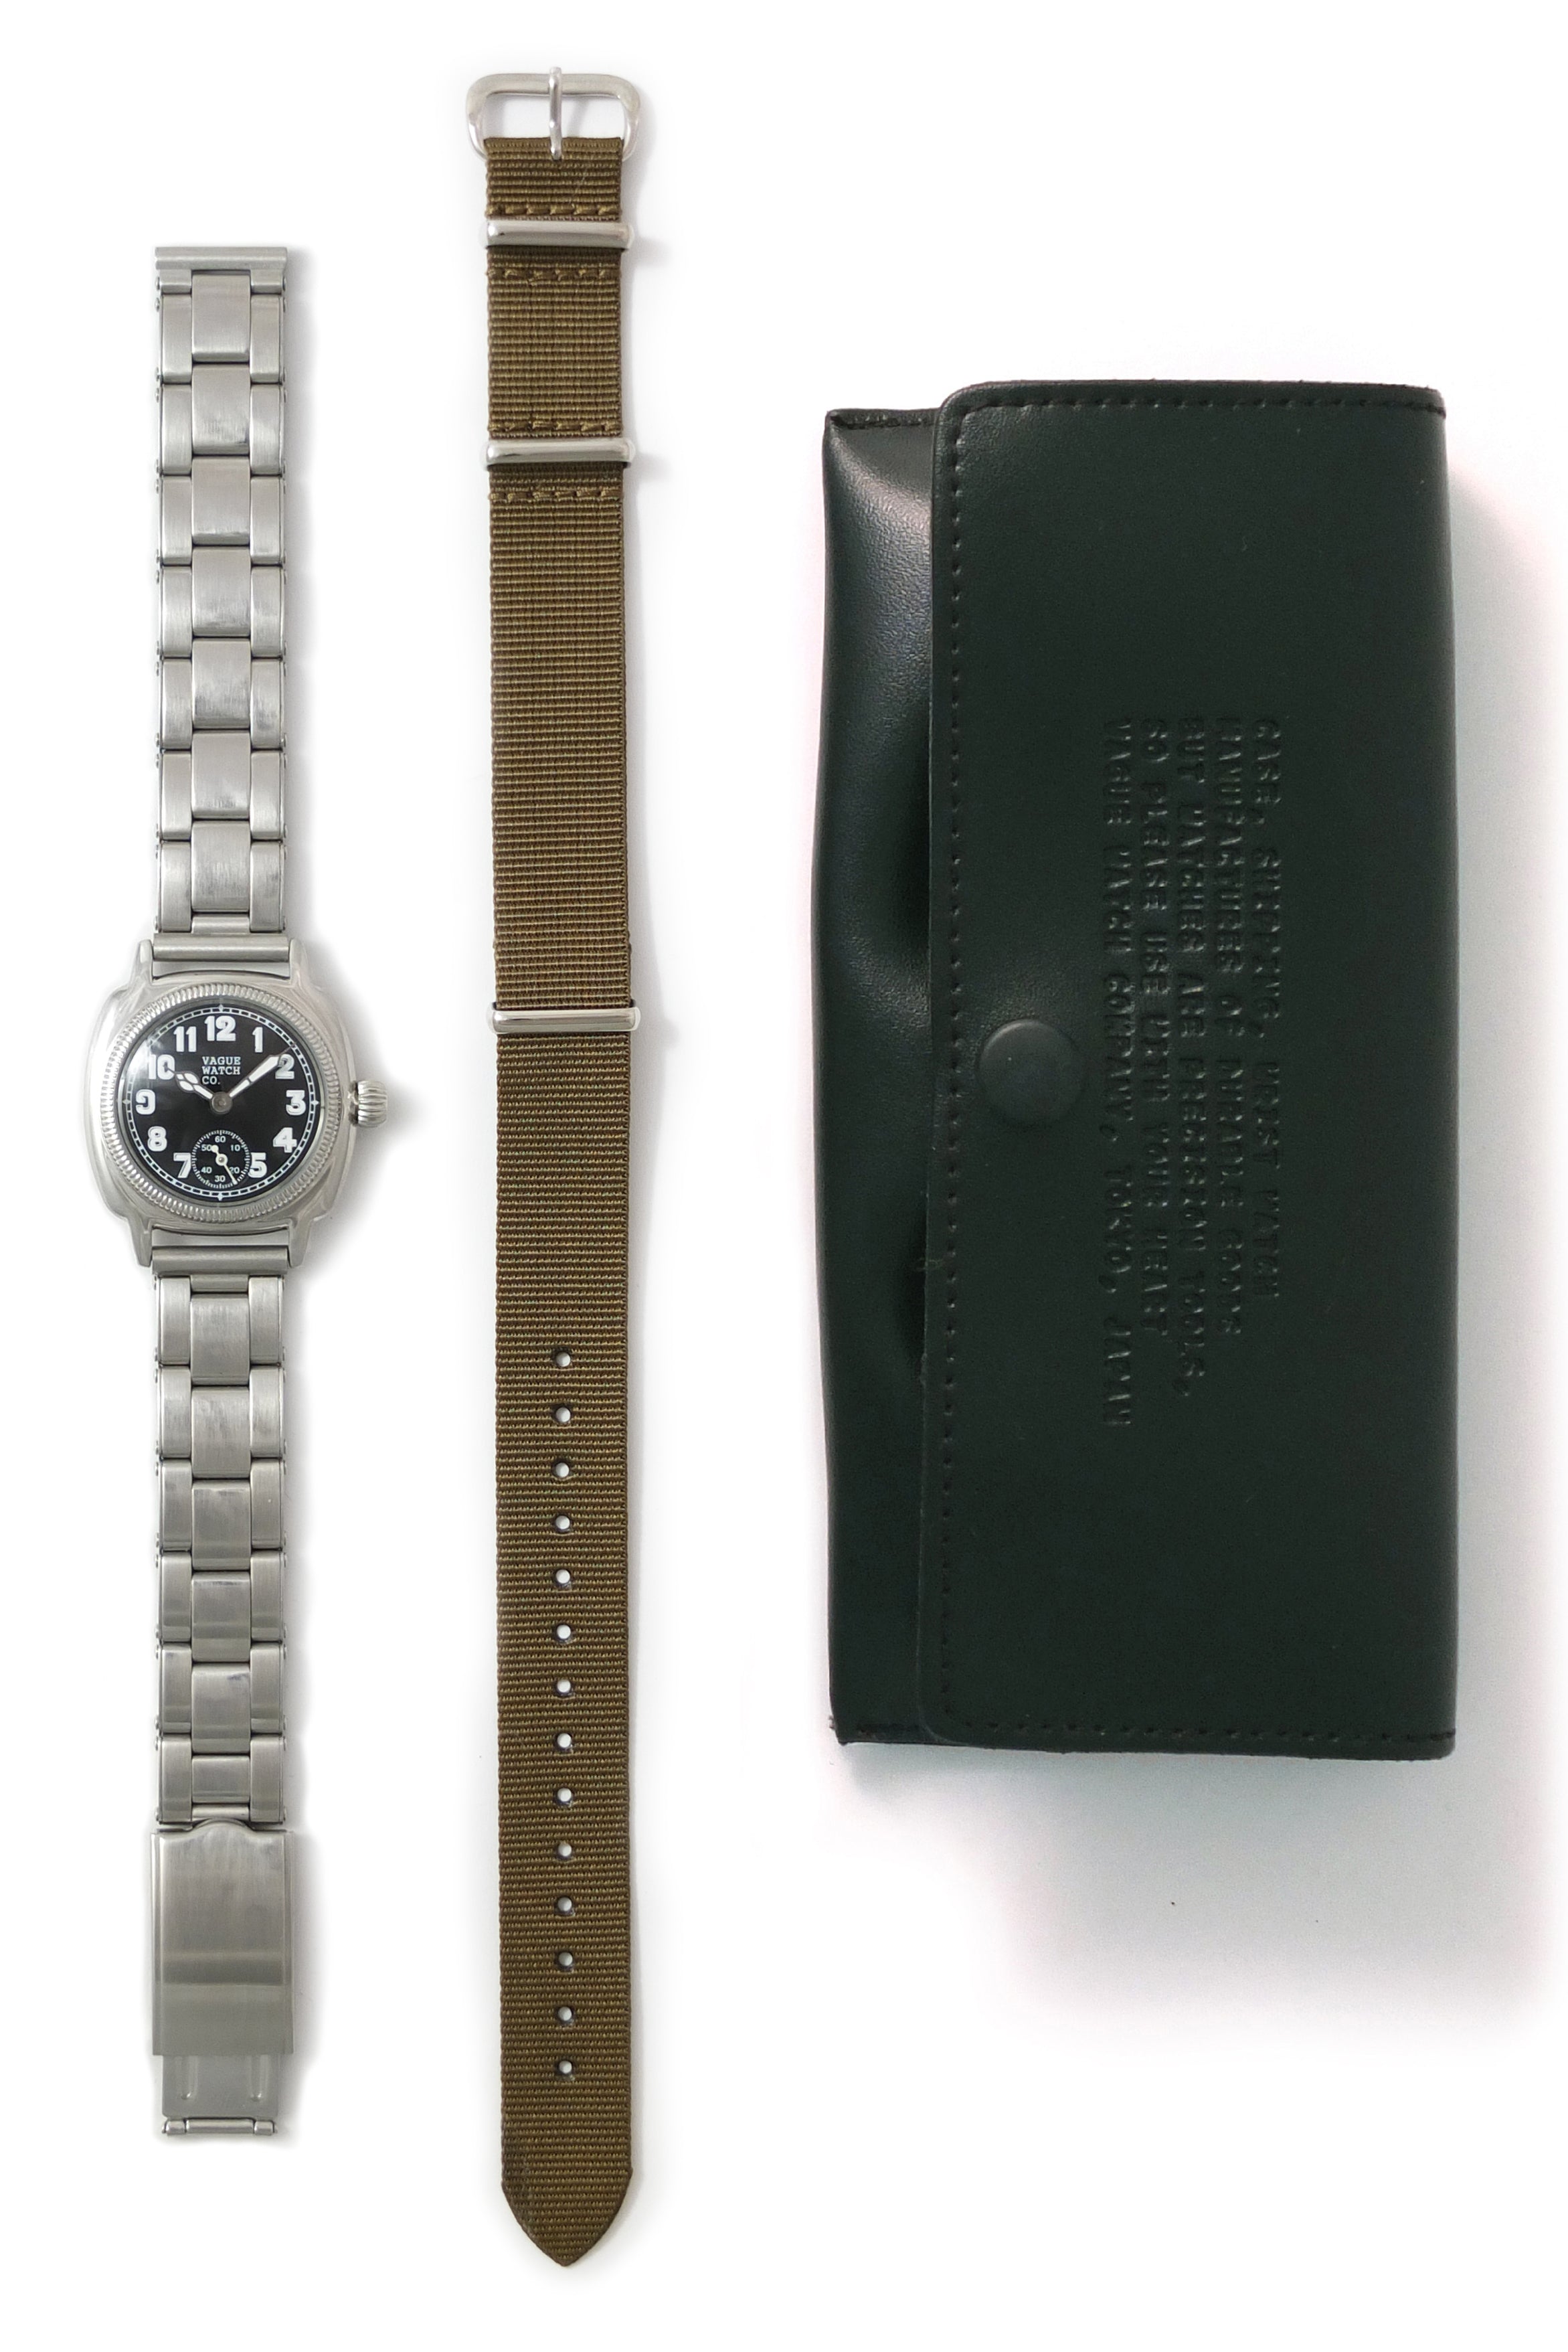 vague watch co./ Coussin 12 Croco / 保証書付 お気に入り nods.gov.ag